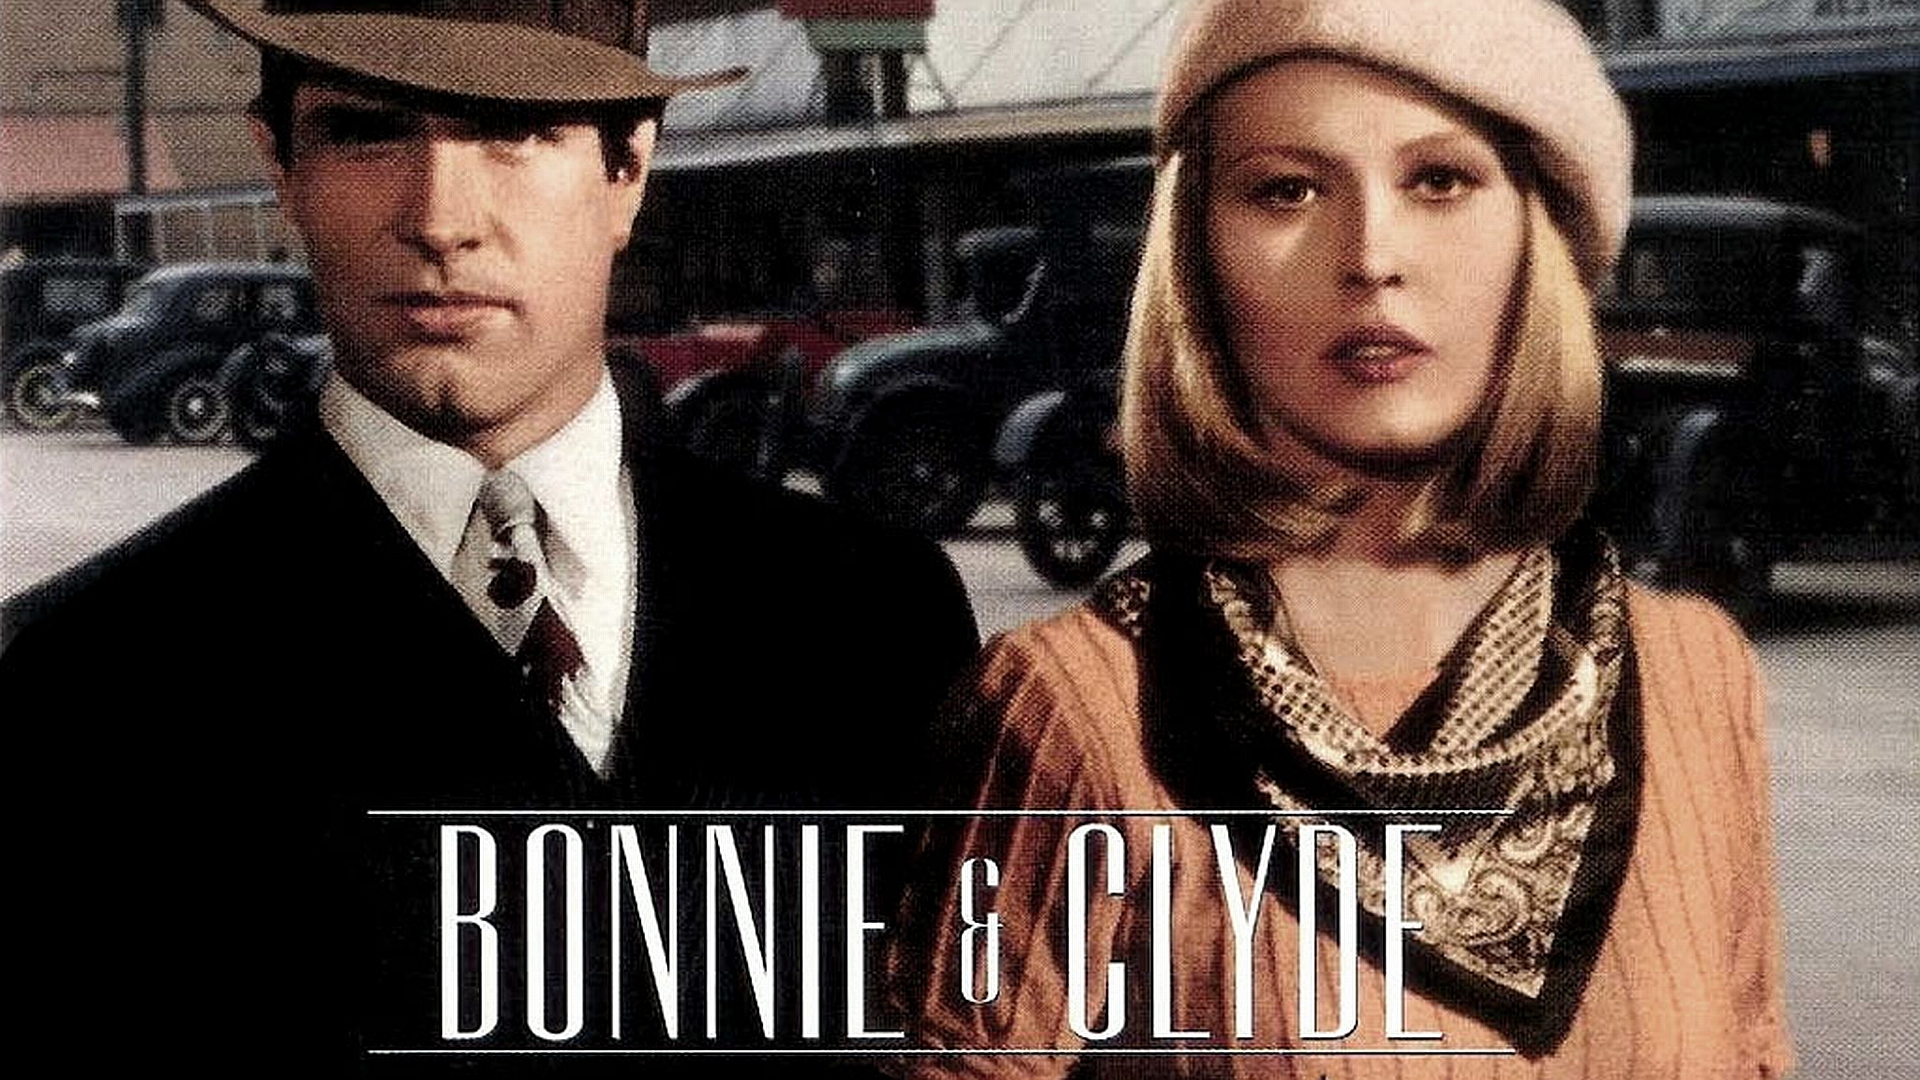 Movie Bonnie And Clyde HD Wallpaper | Background Image